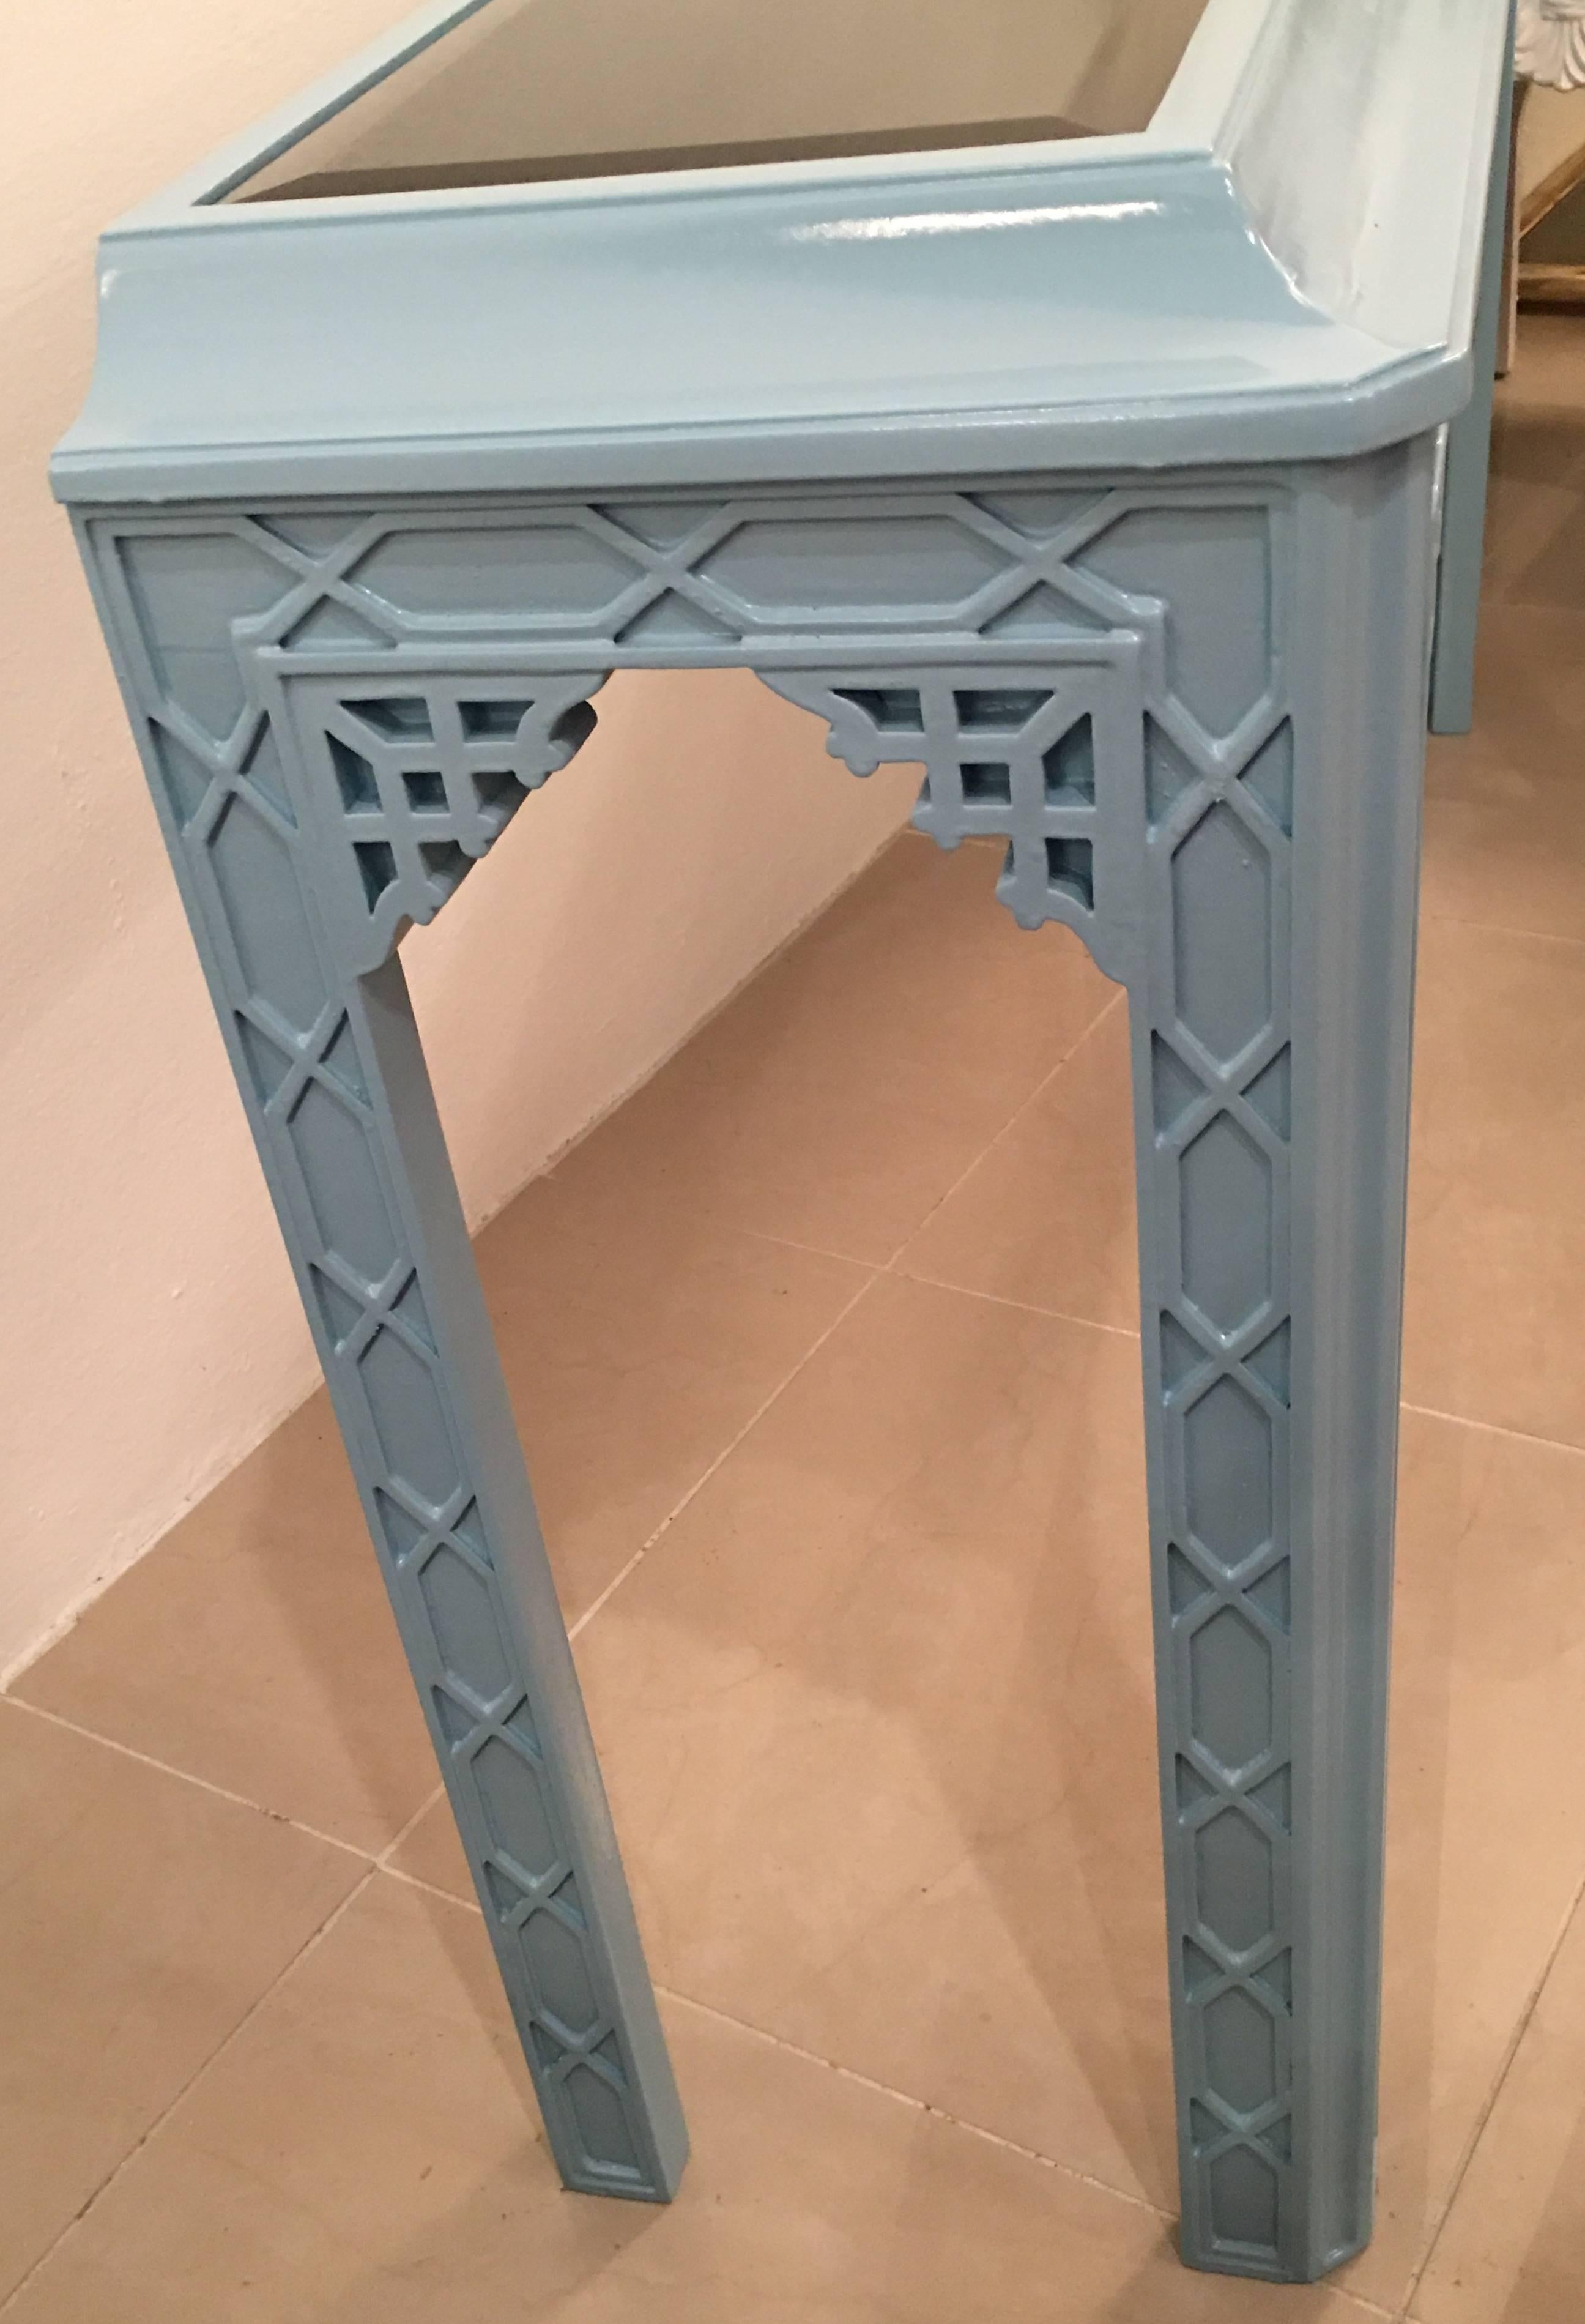 Late 20th Century Console Table Lacquered Blue Vintage Fret Work Fretwork Chinese Chippendale